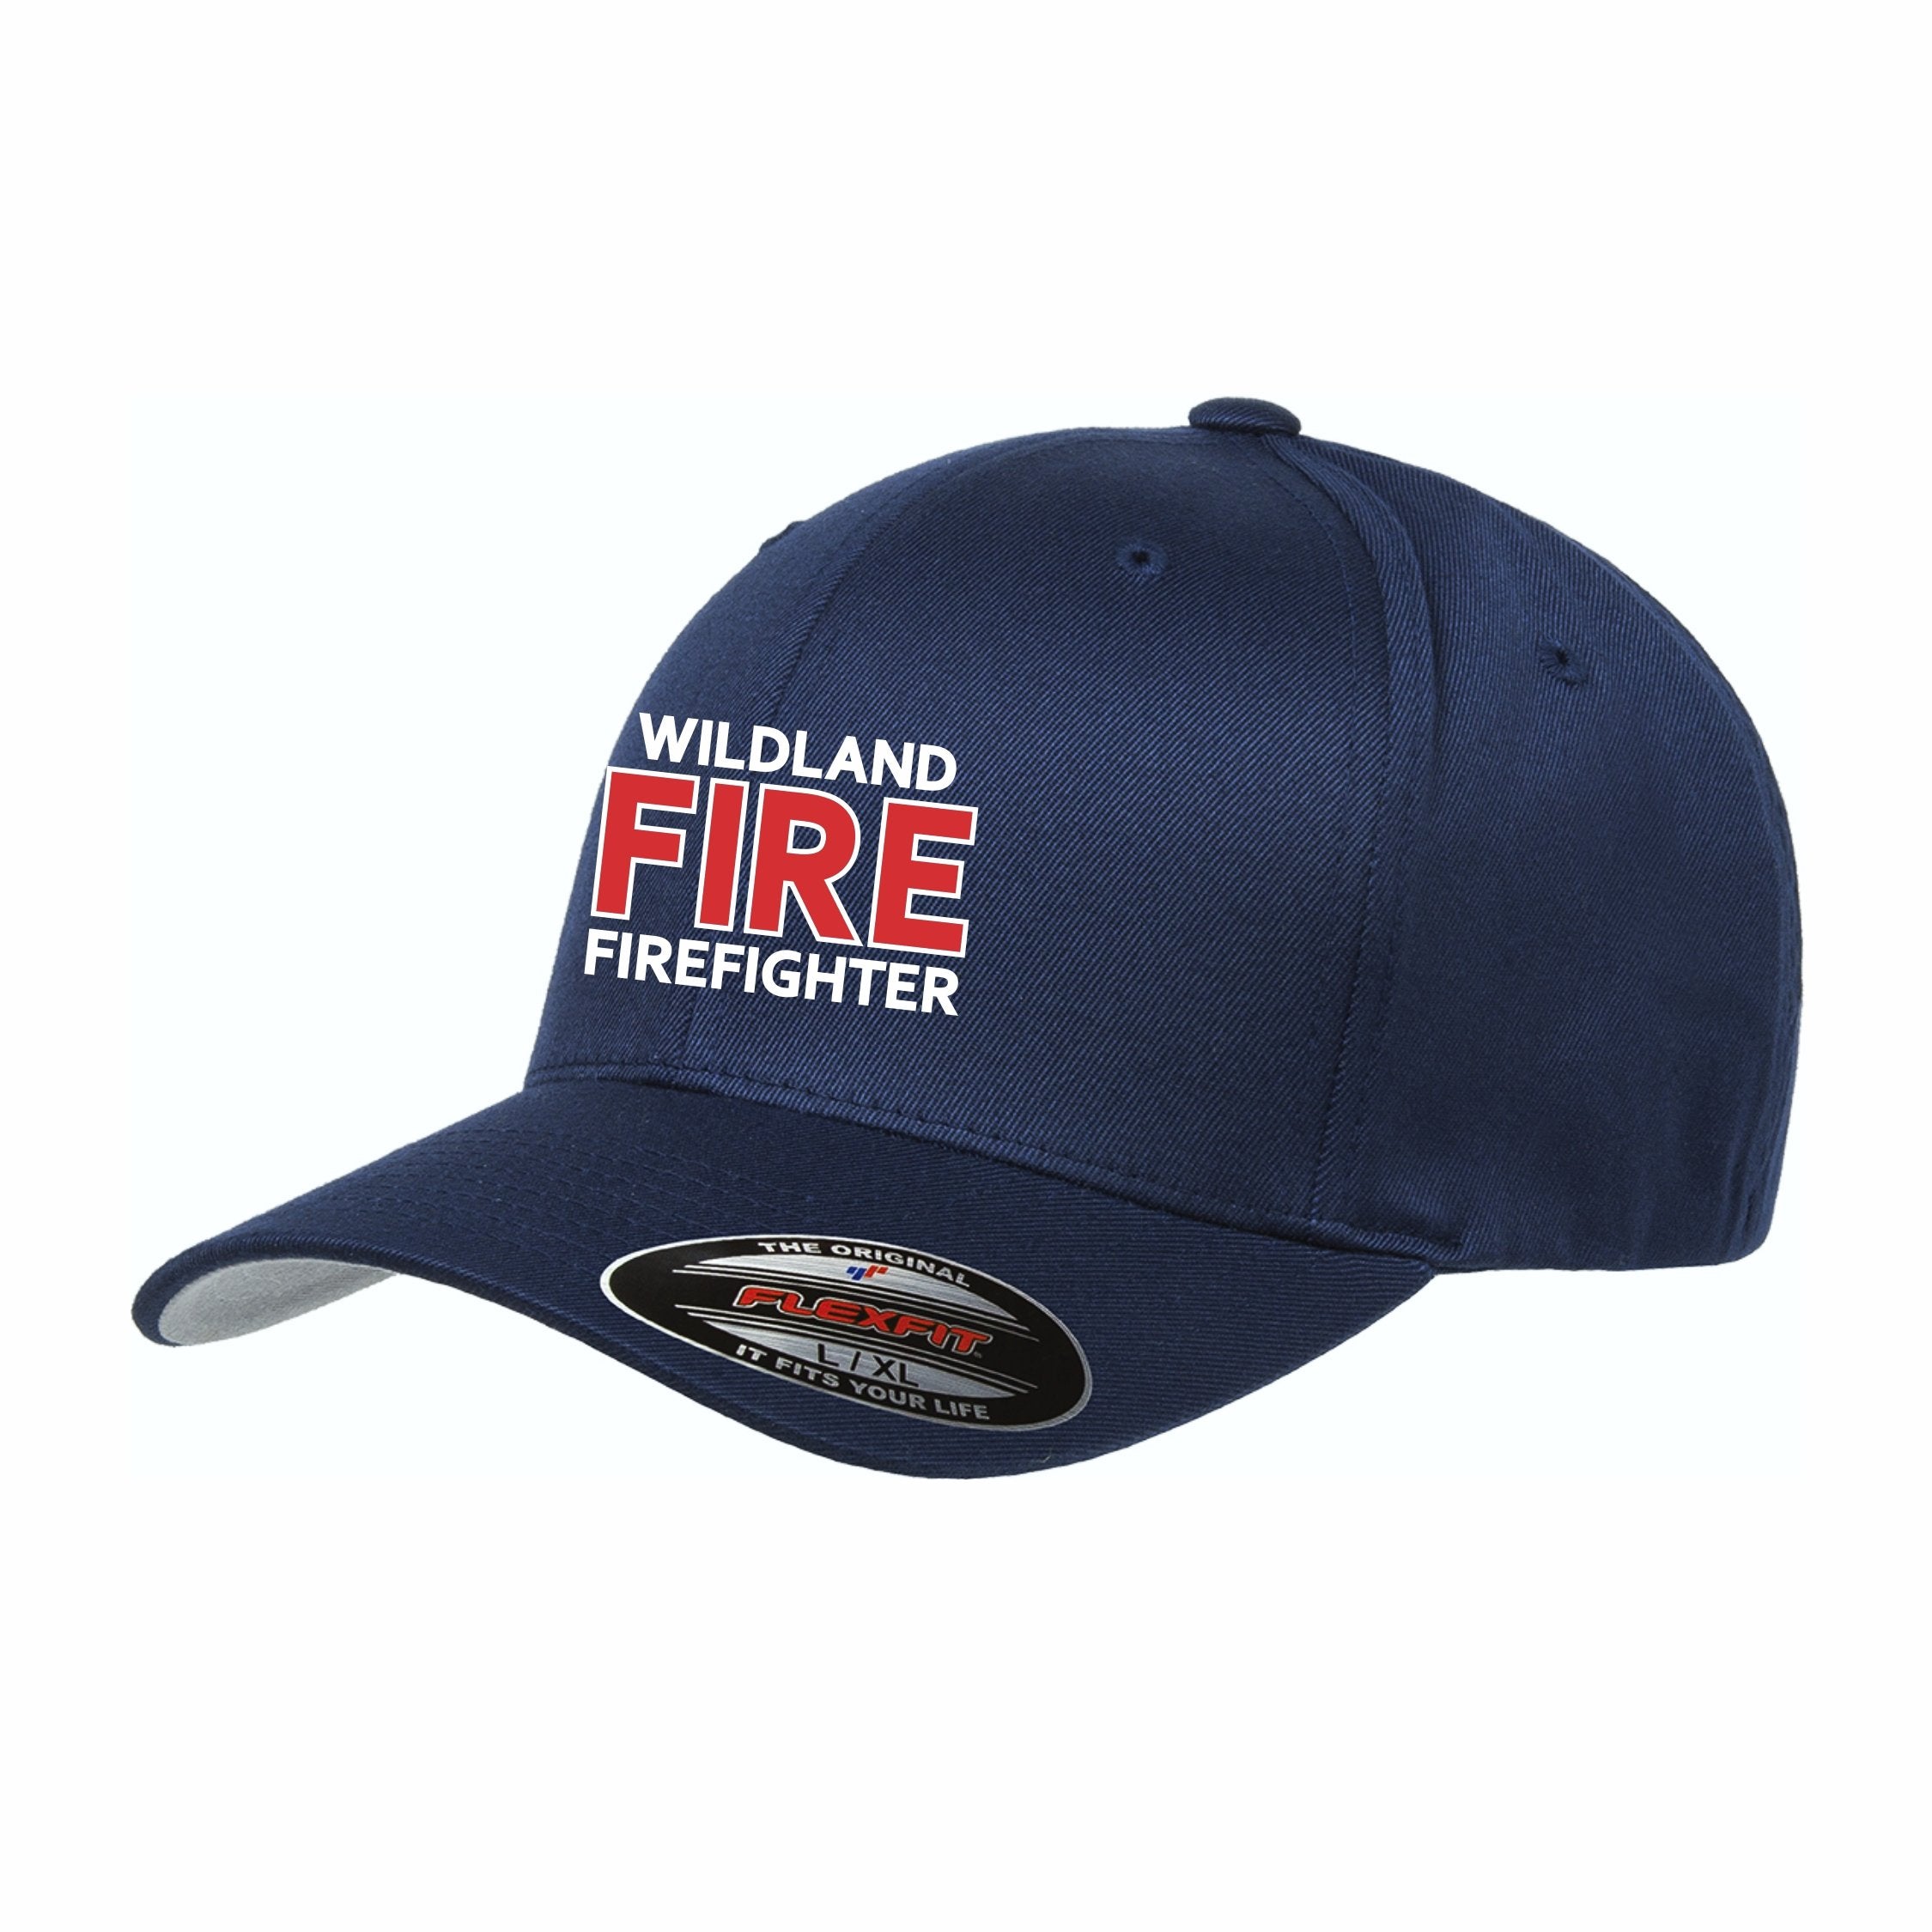 Navy Wildland Fire Firefighter Flexfit® Wooly Combed Twill Cap